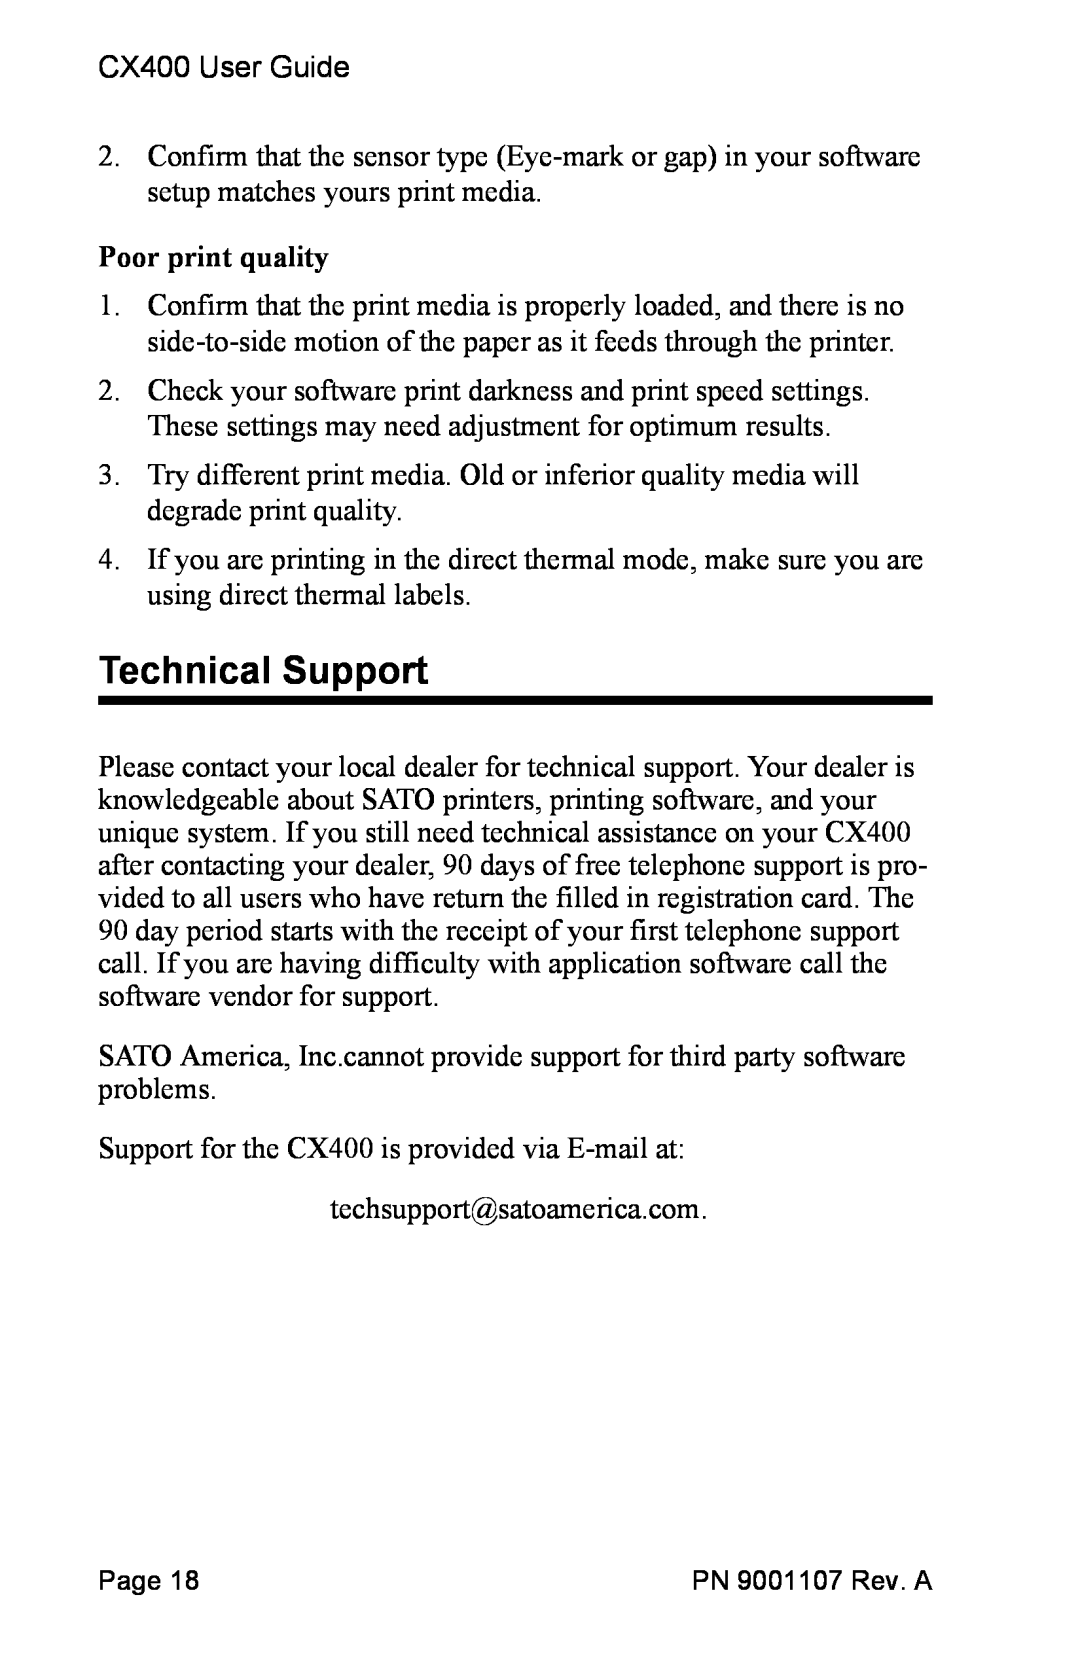 SATO 400 manual Technical Support, Poor print quality 